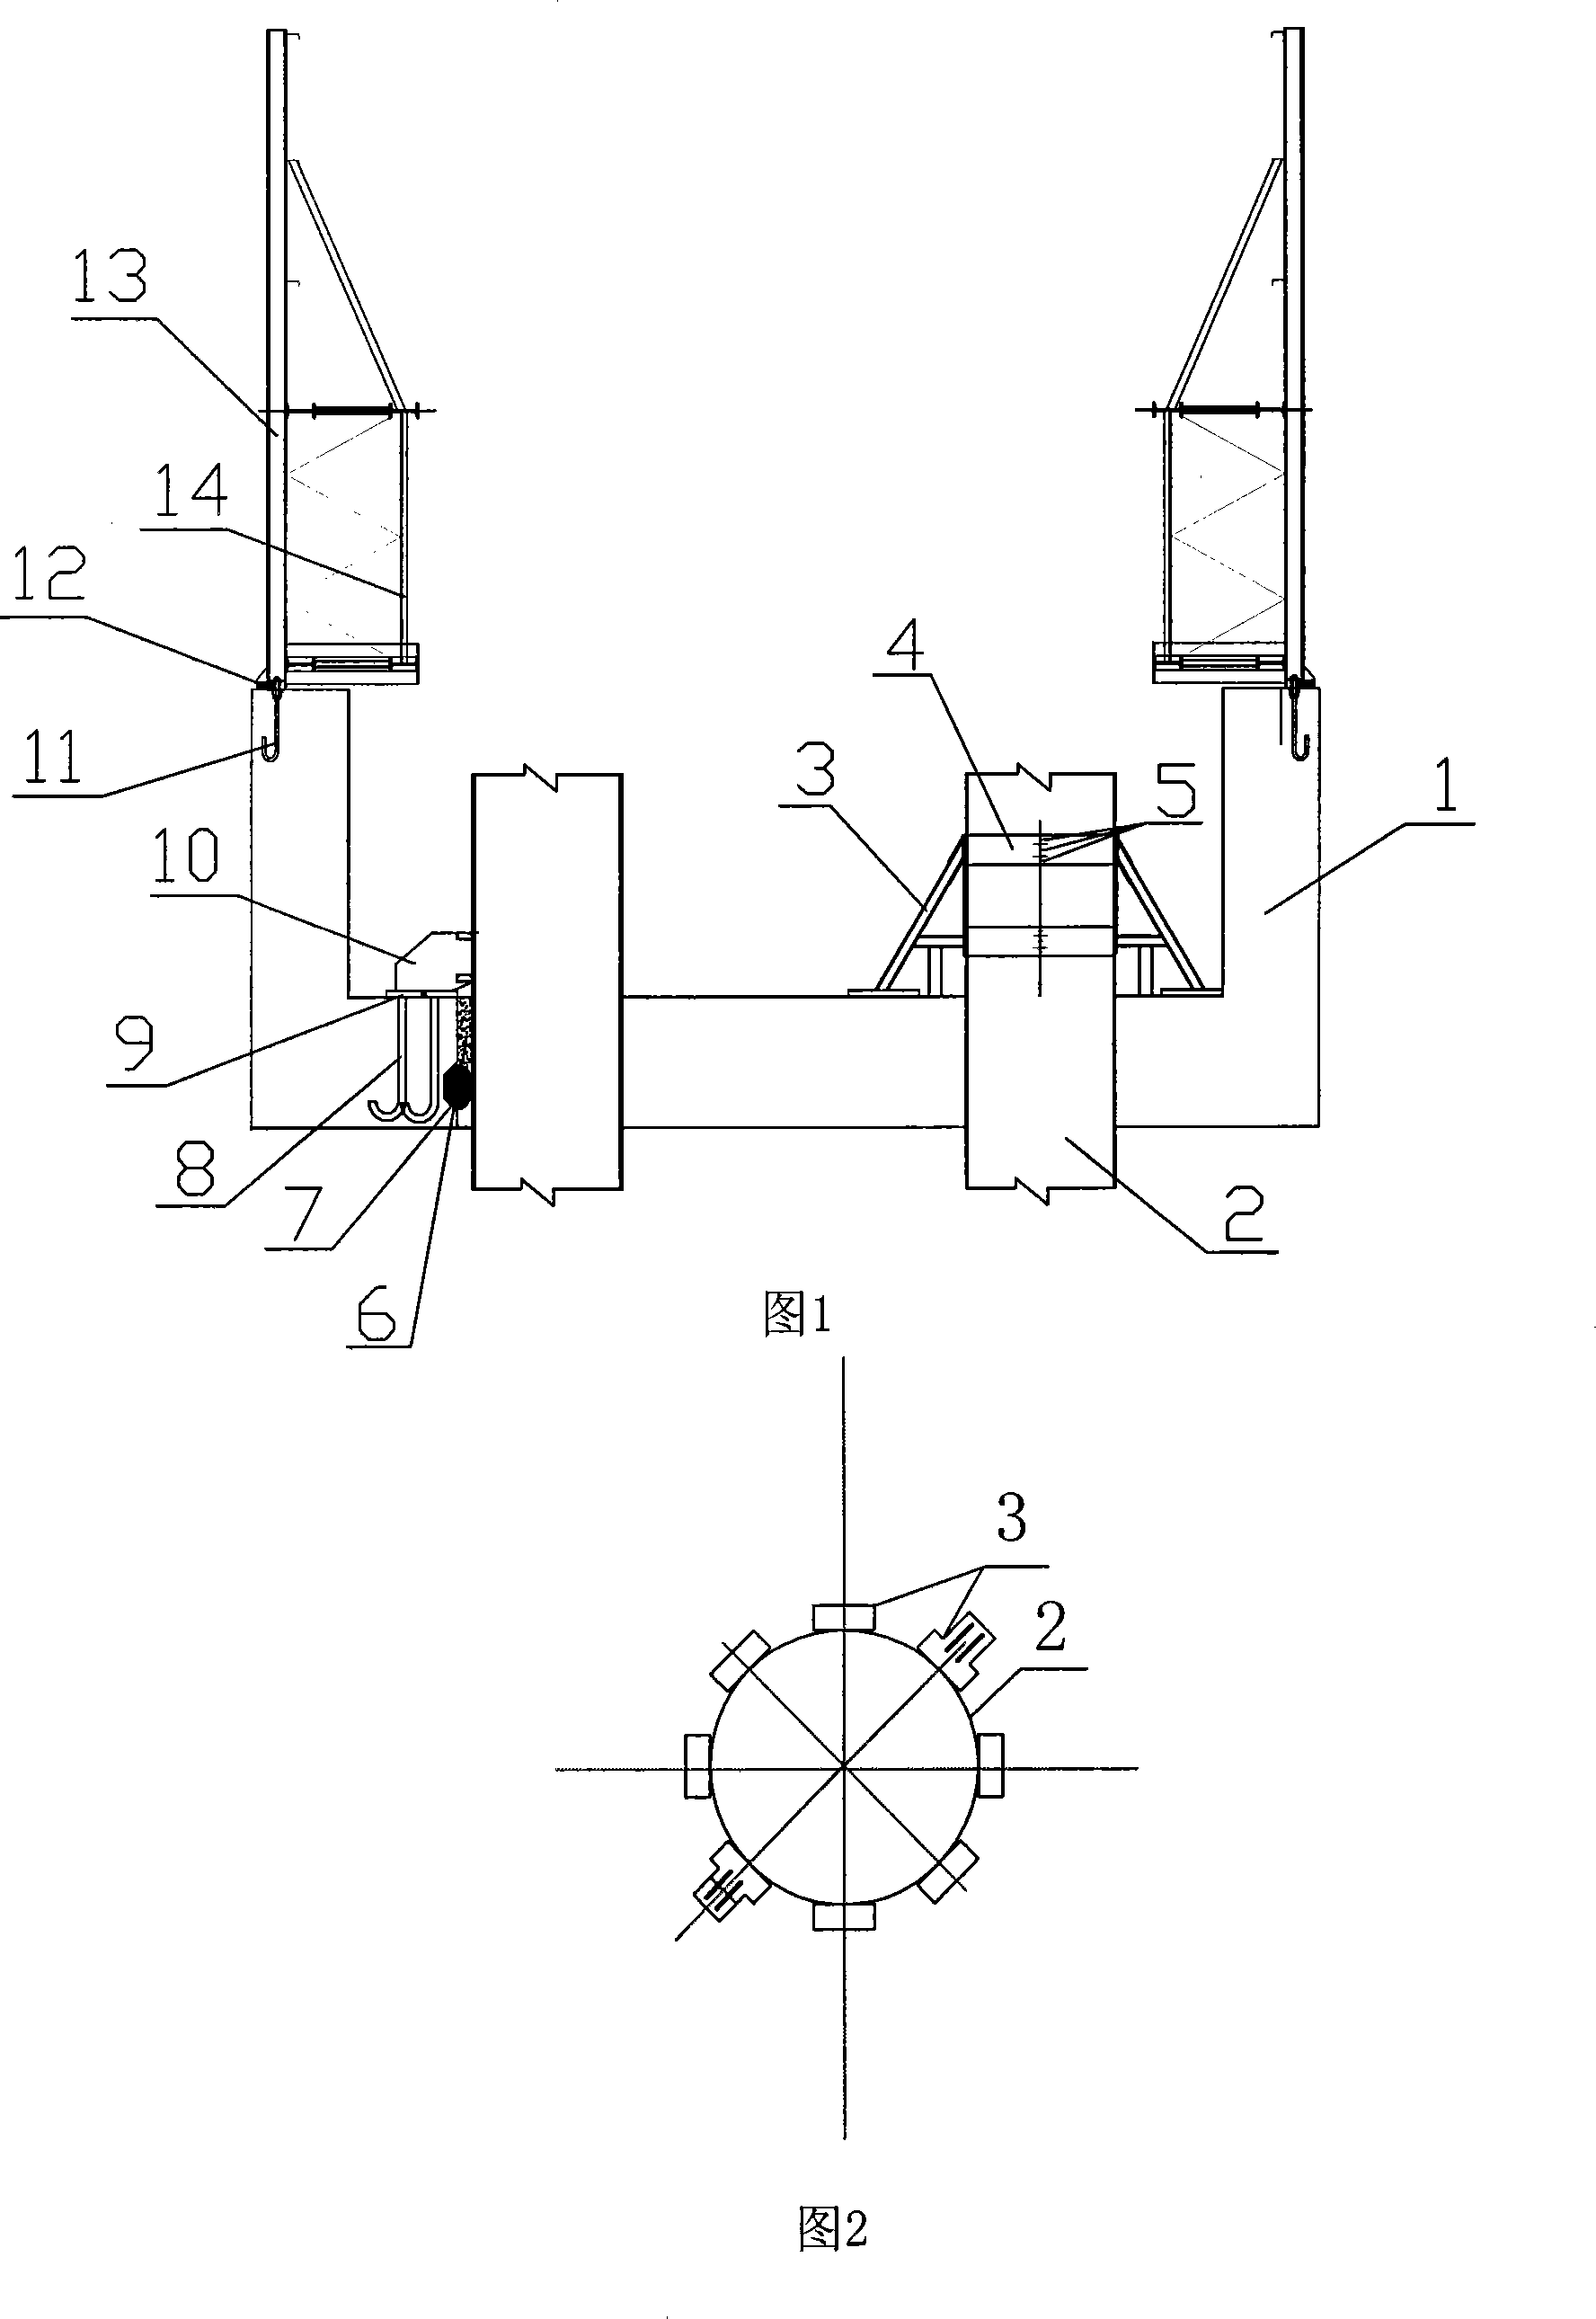 Underwater no-bottom closing concrete boxed cofferdam and method of use thereof